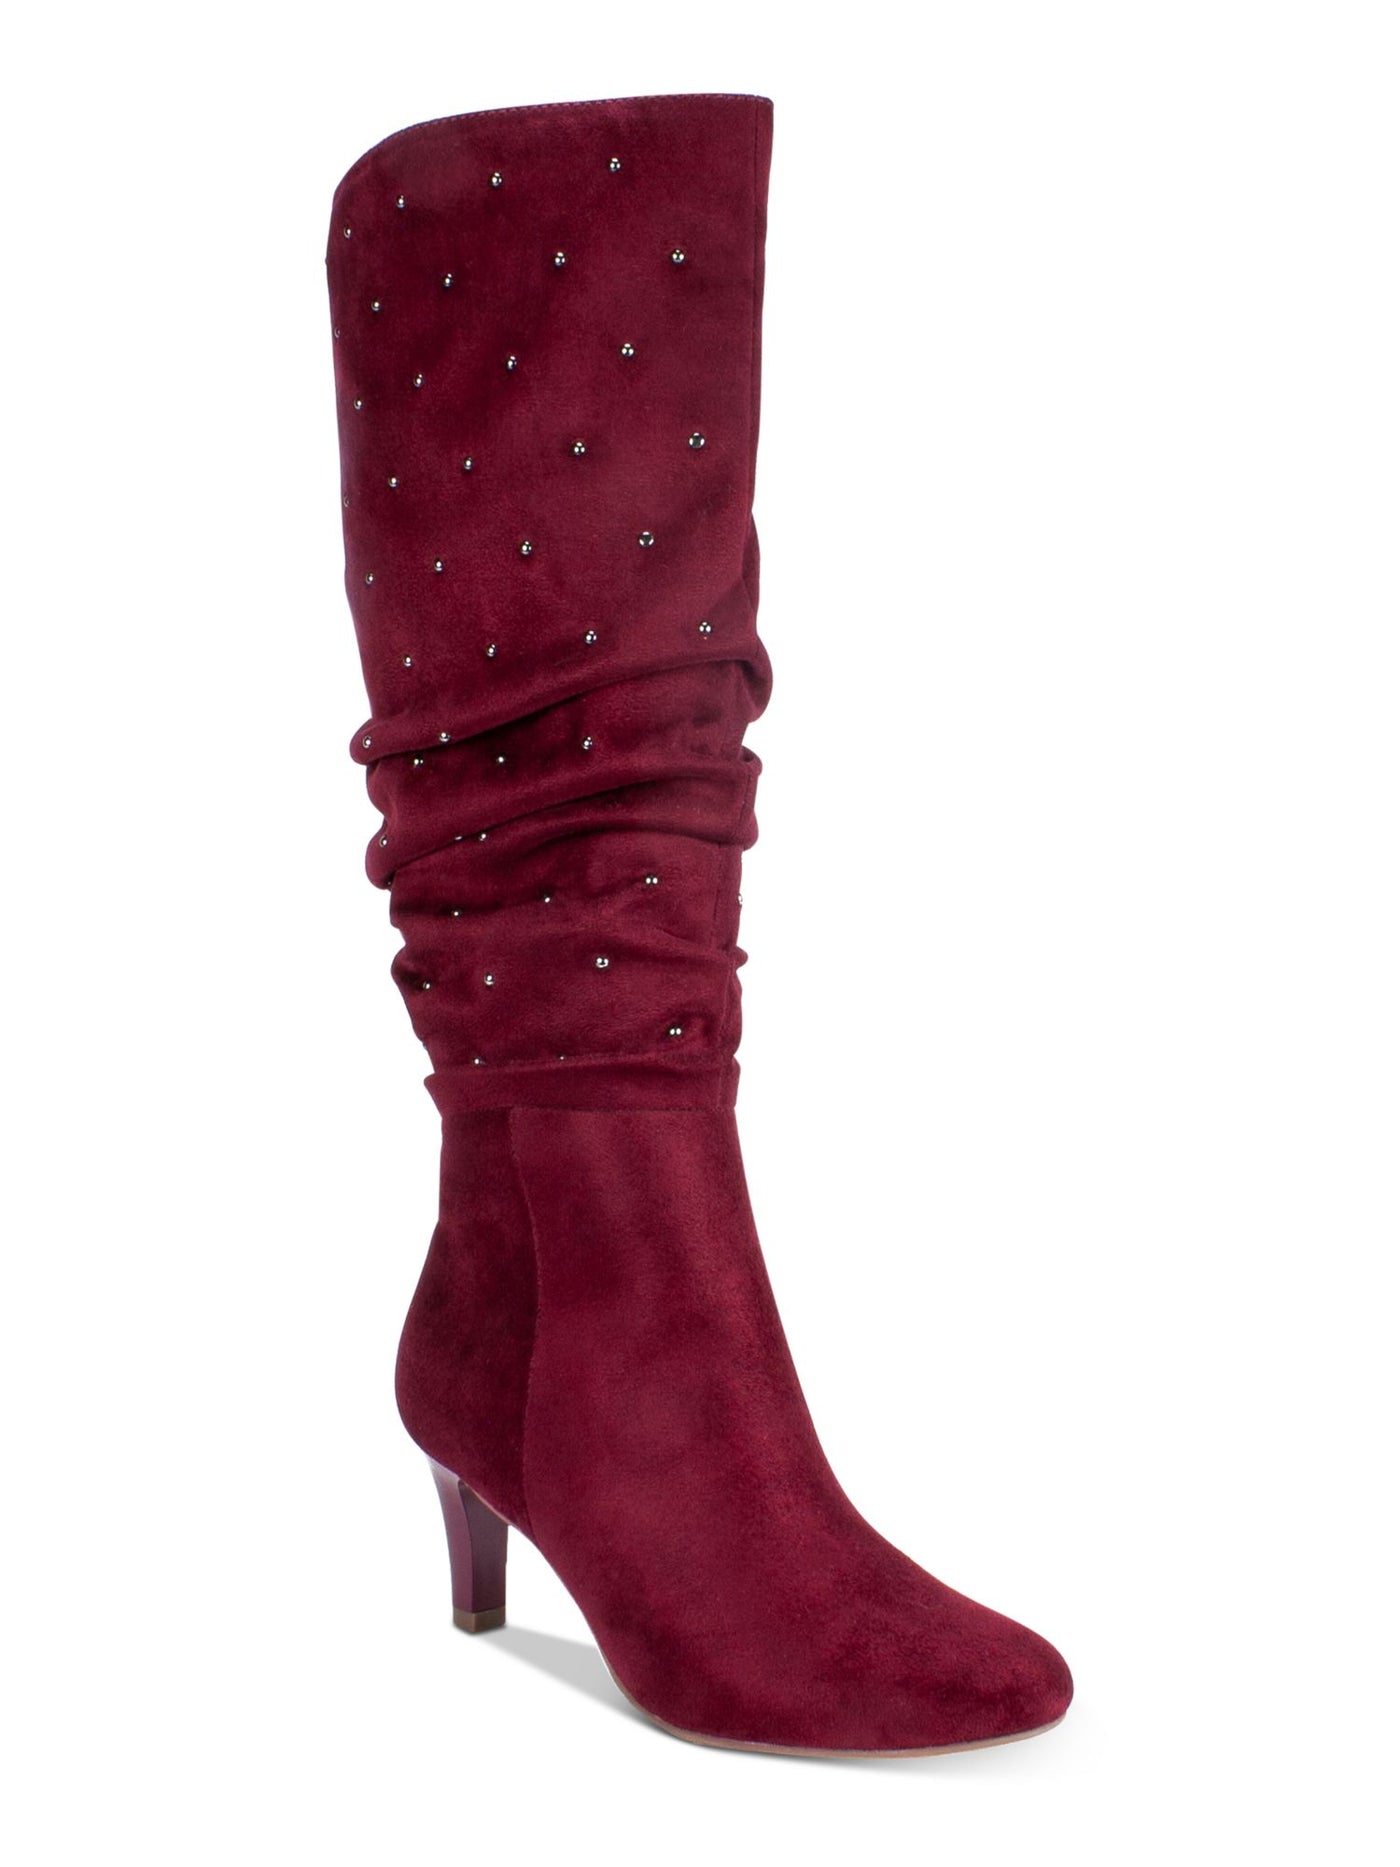 RIALTO Womens Burgundy Architectural Heel Elastic Goring Ruched Studded Canoe Almond Toe Zip-Up Boots Shoes 8 M